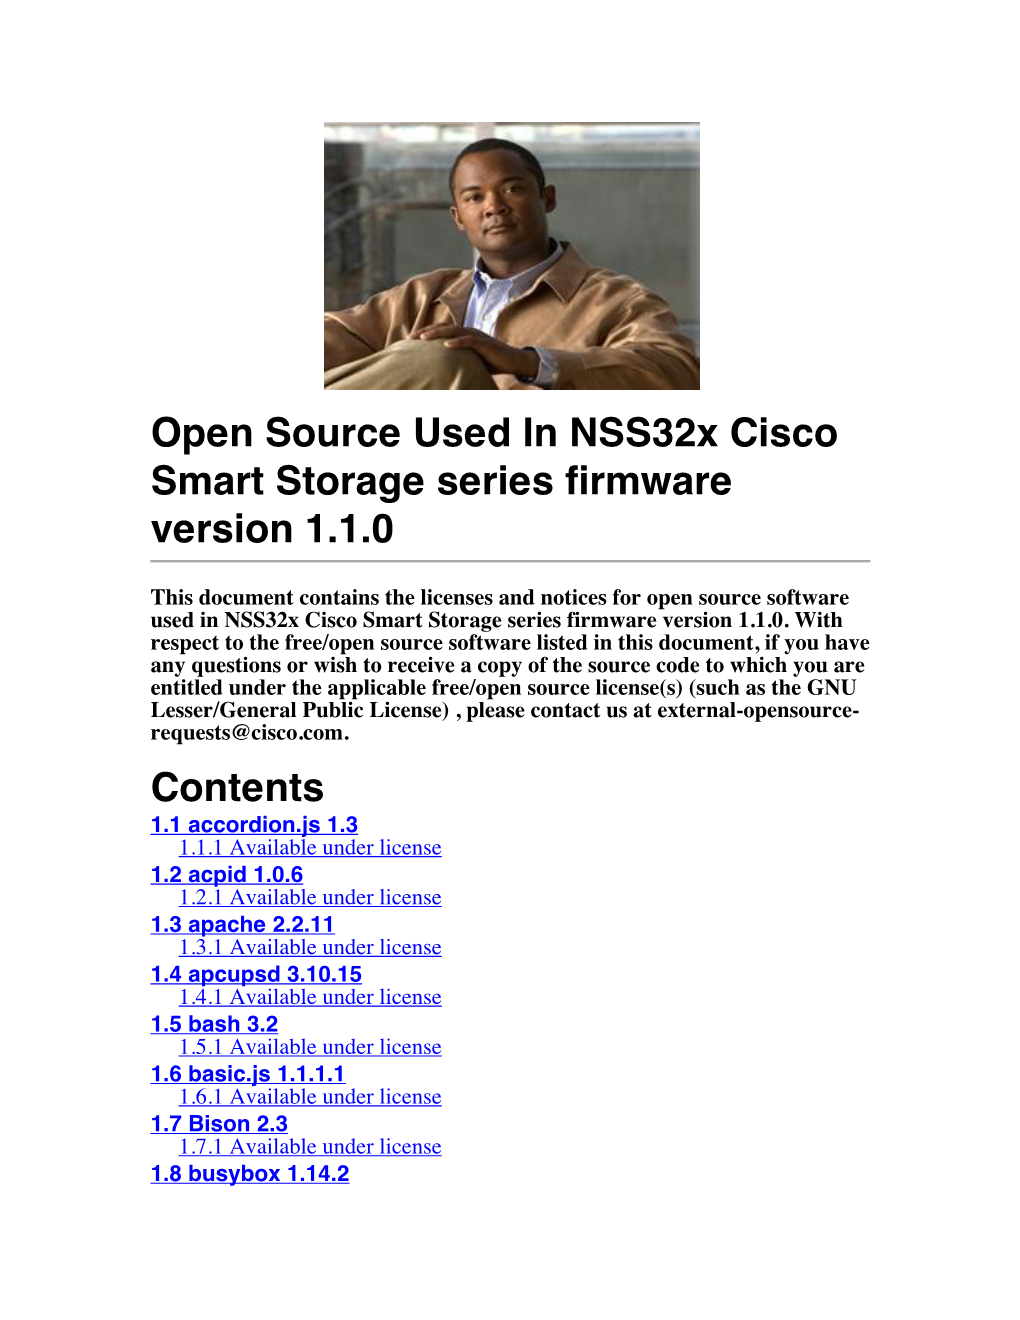 Open Source Used in Nss32x Cisco Smart Storage Series Firmware